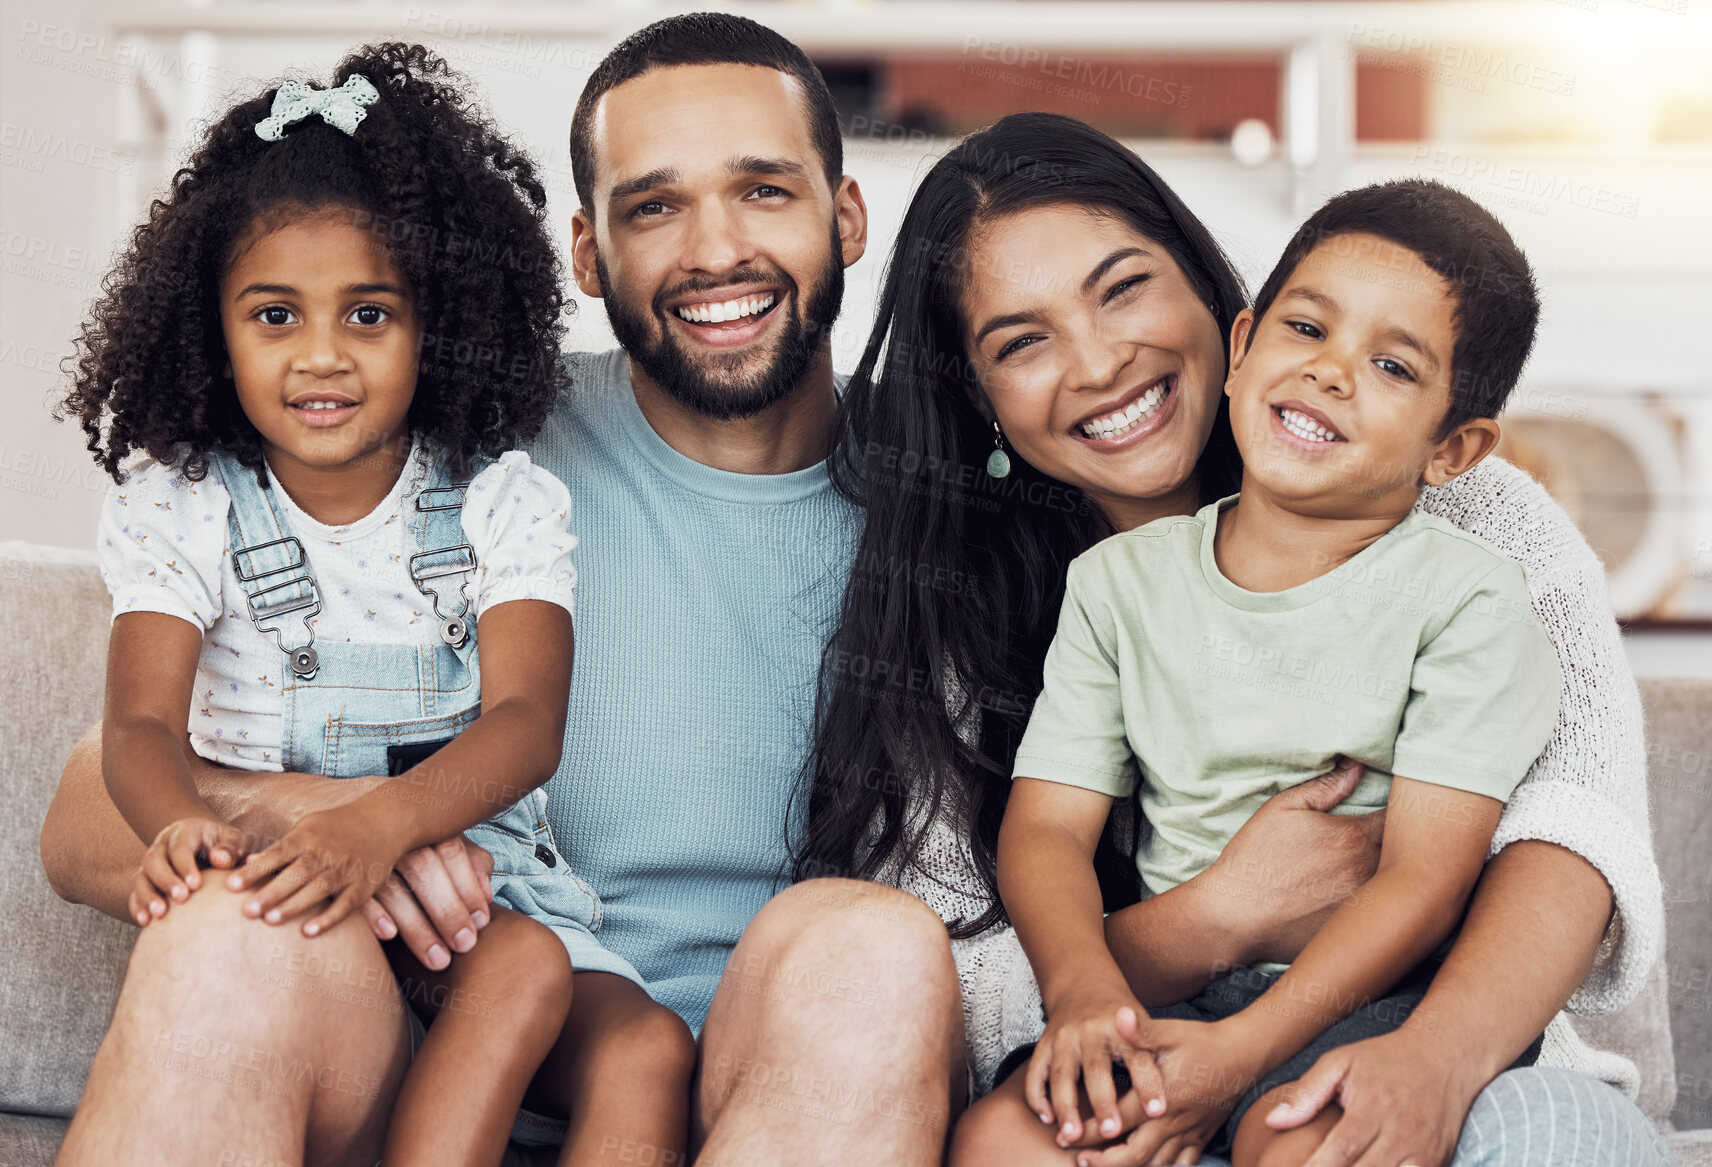 Buy stock photo Happy, smile and portrait of a family bonding and relaxing together at home in puerto rico. Happiness, love and parents resting and holding their children with care at their comfortable house.